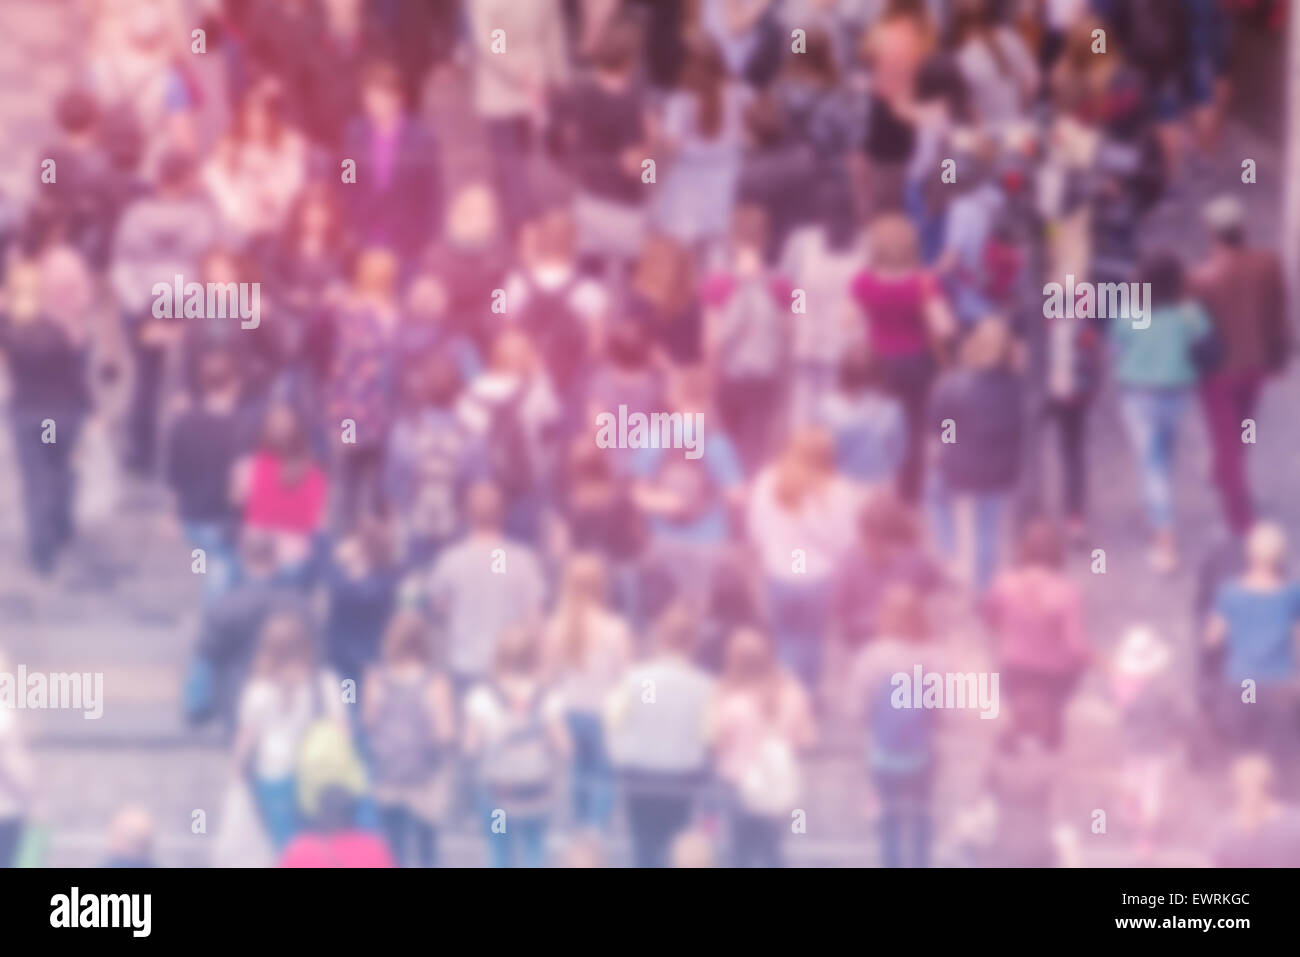 General Public Opinion Blur Background, Aerial View with Unrecognizable Crowded Population Out of Focus, Blurred Crowd of People Stock Photo